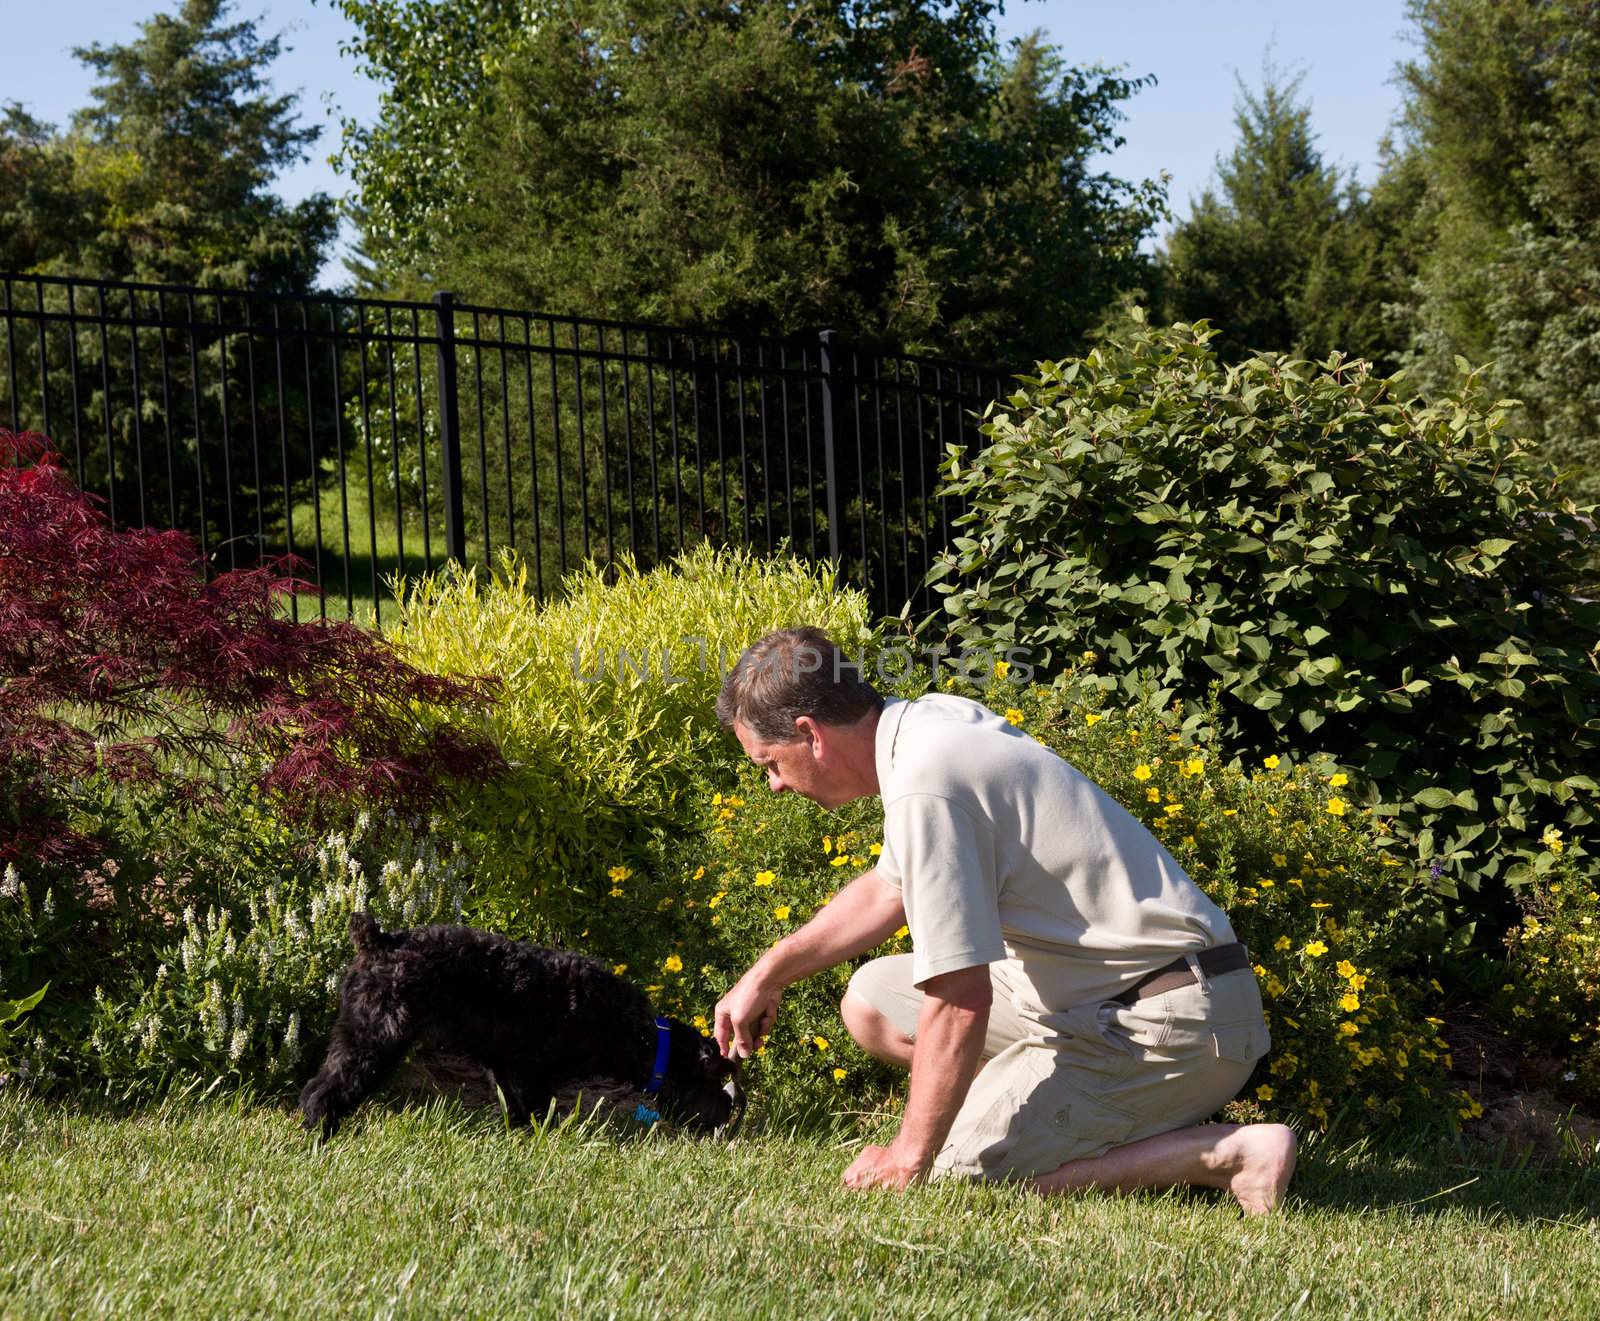 Baby boomer sitting on the grass lawn and digging for weeds in a flowerbed with pet dog